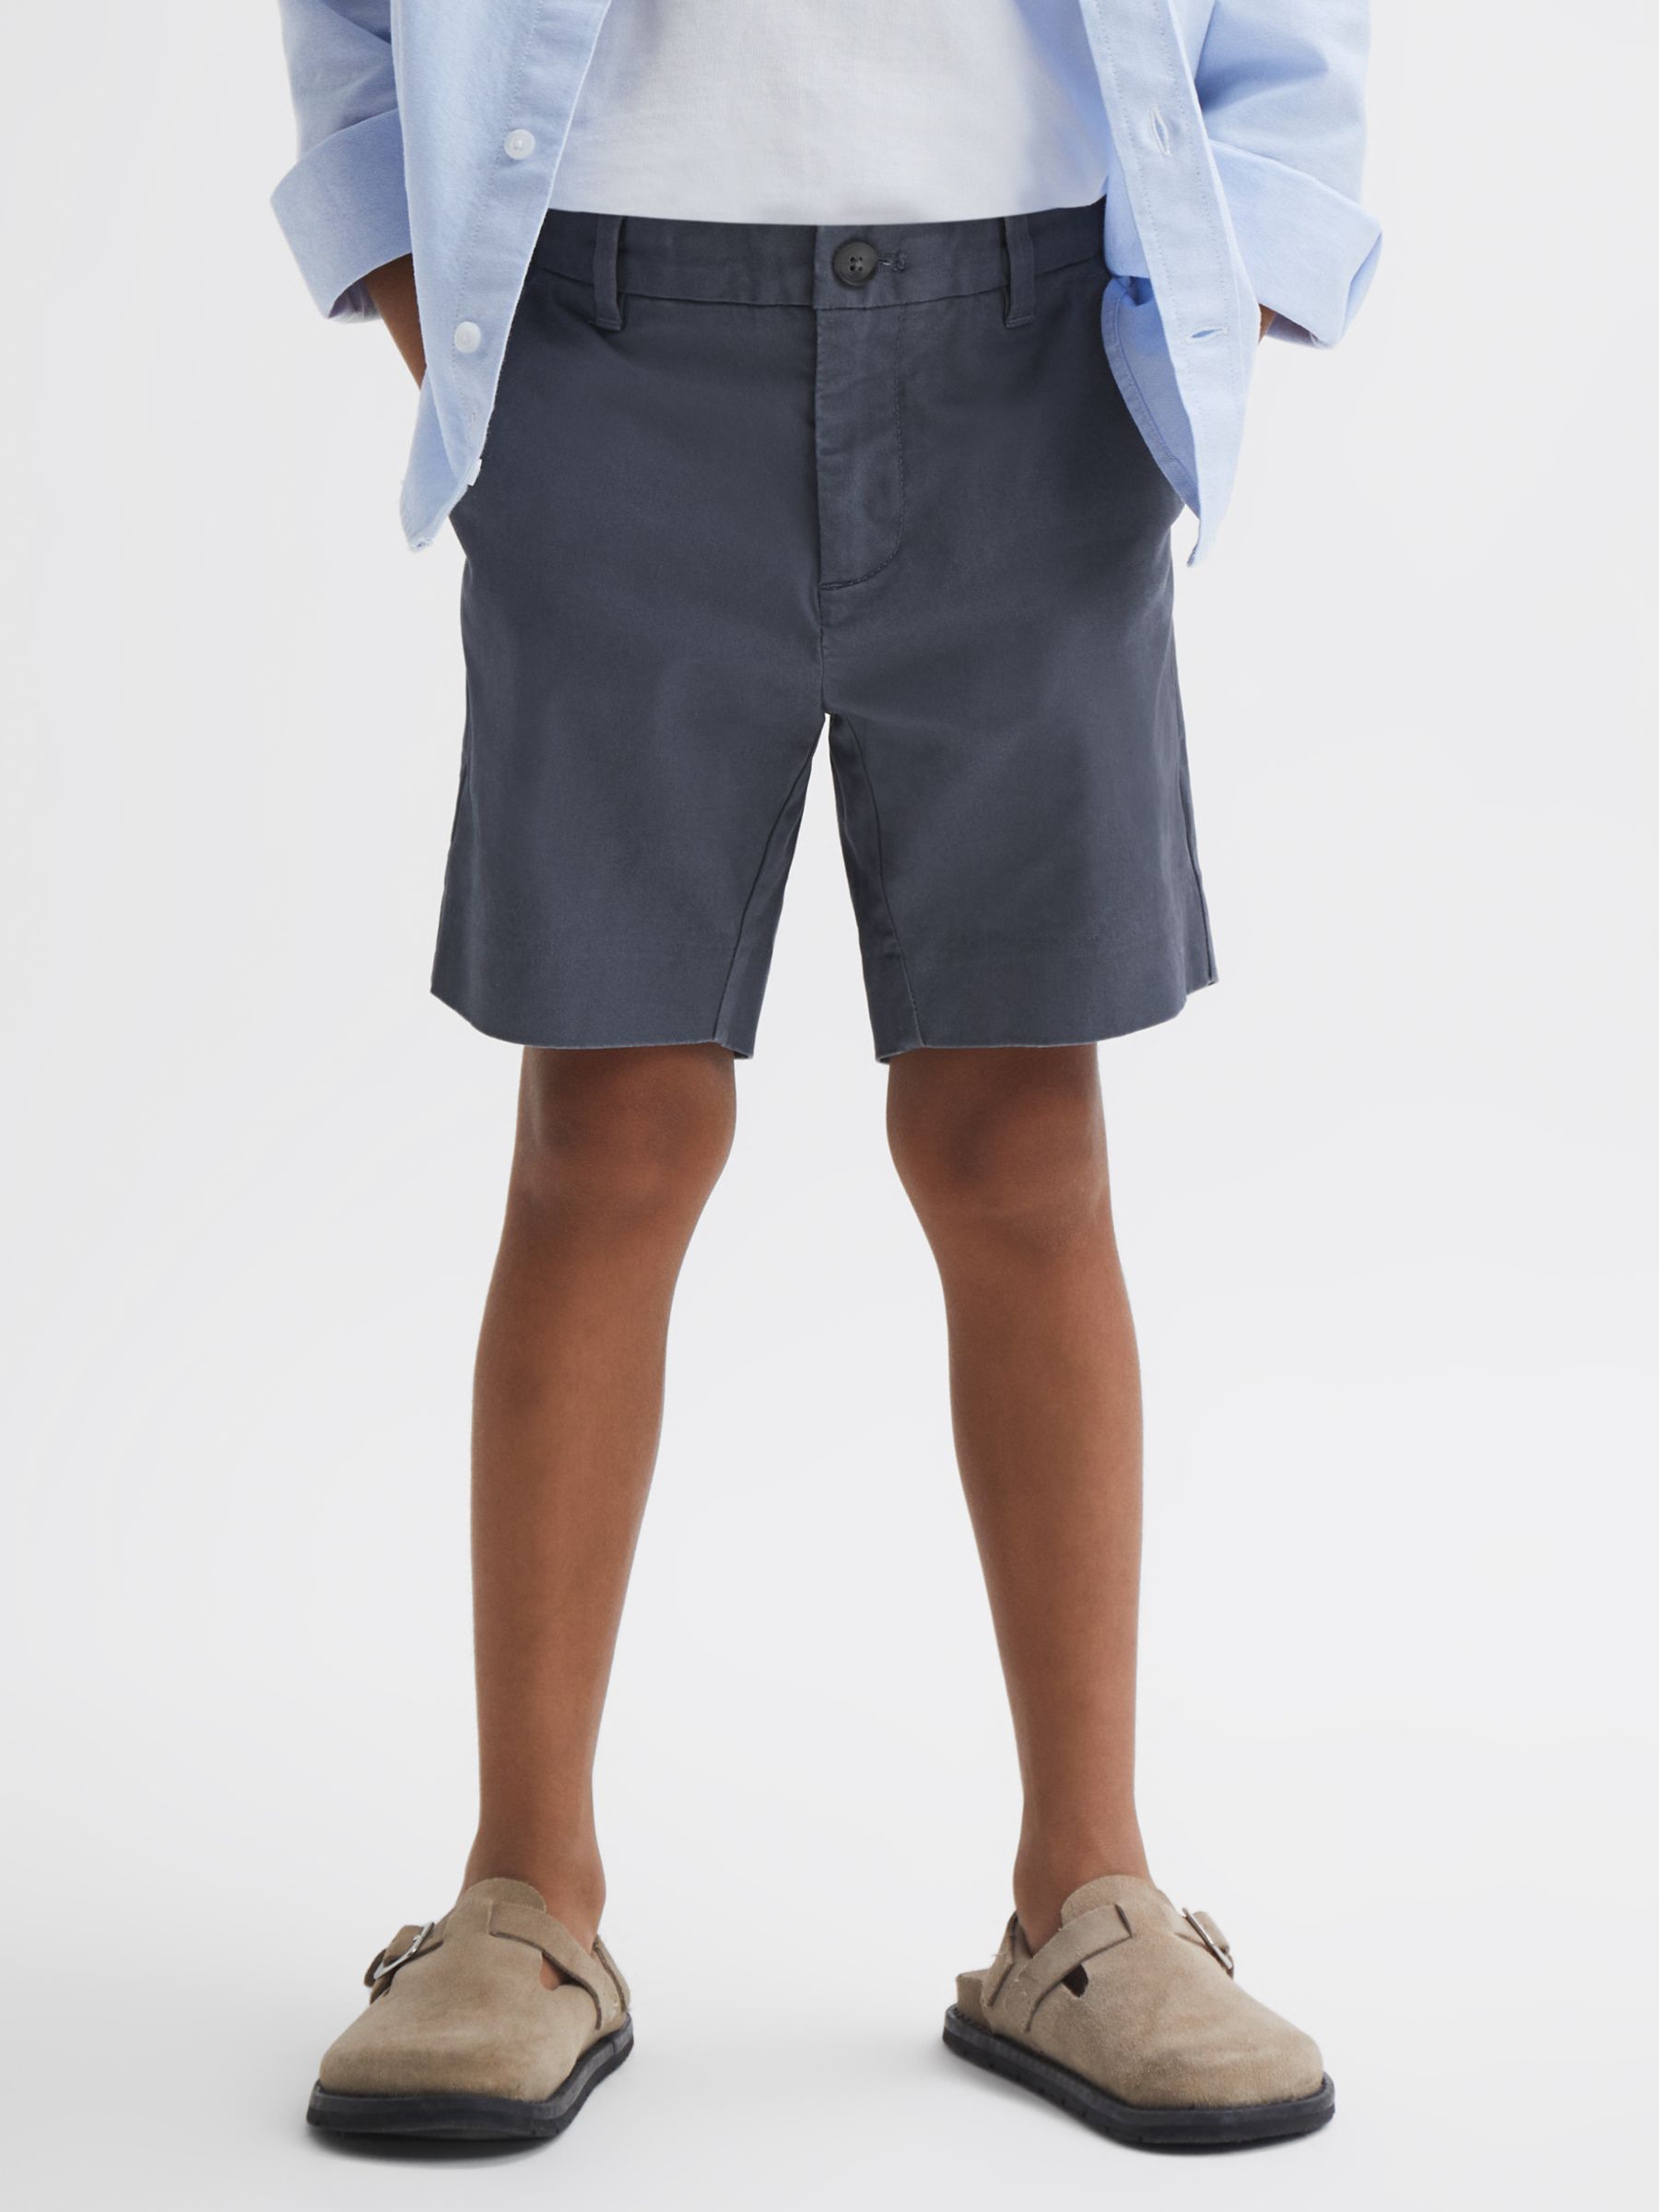 Reiss Kids' Wicket Cotton Blend Casual Chino Shorts, Navy, 8-9 years